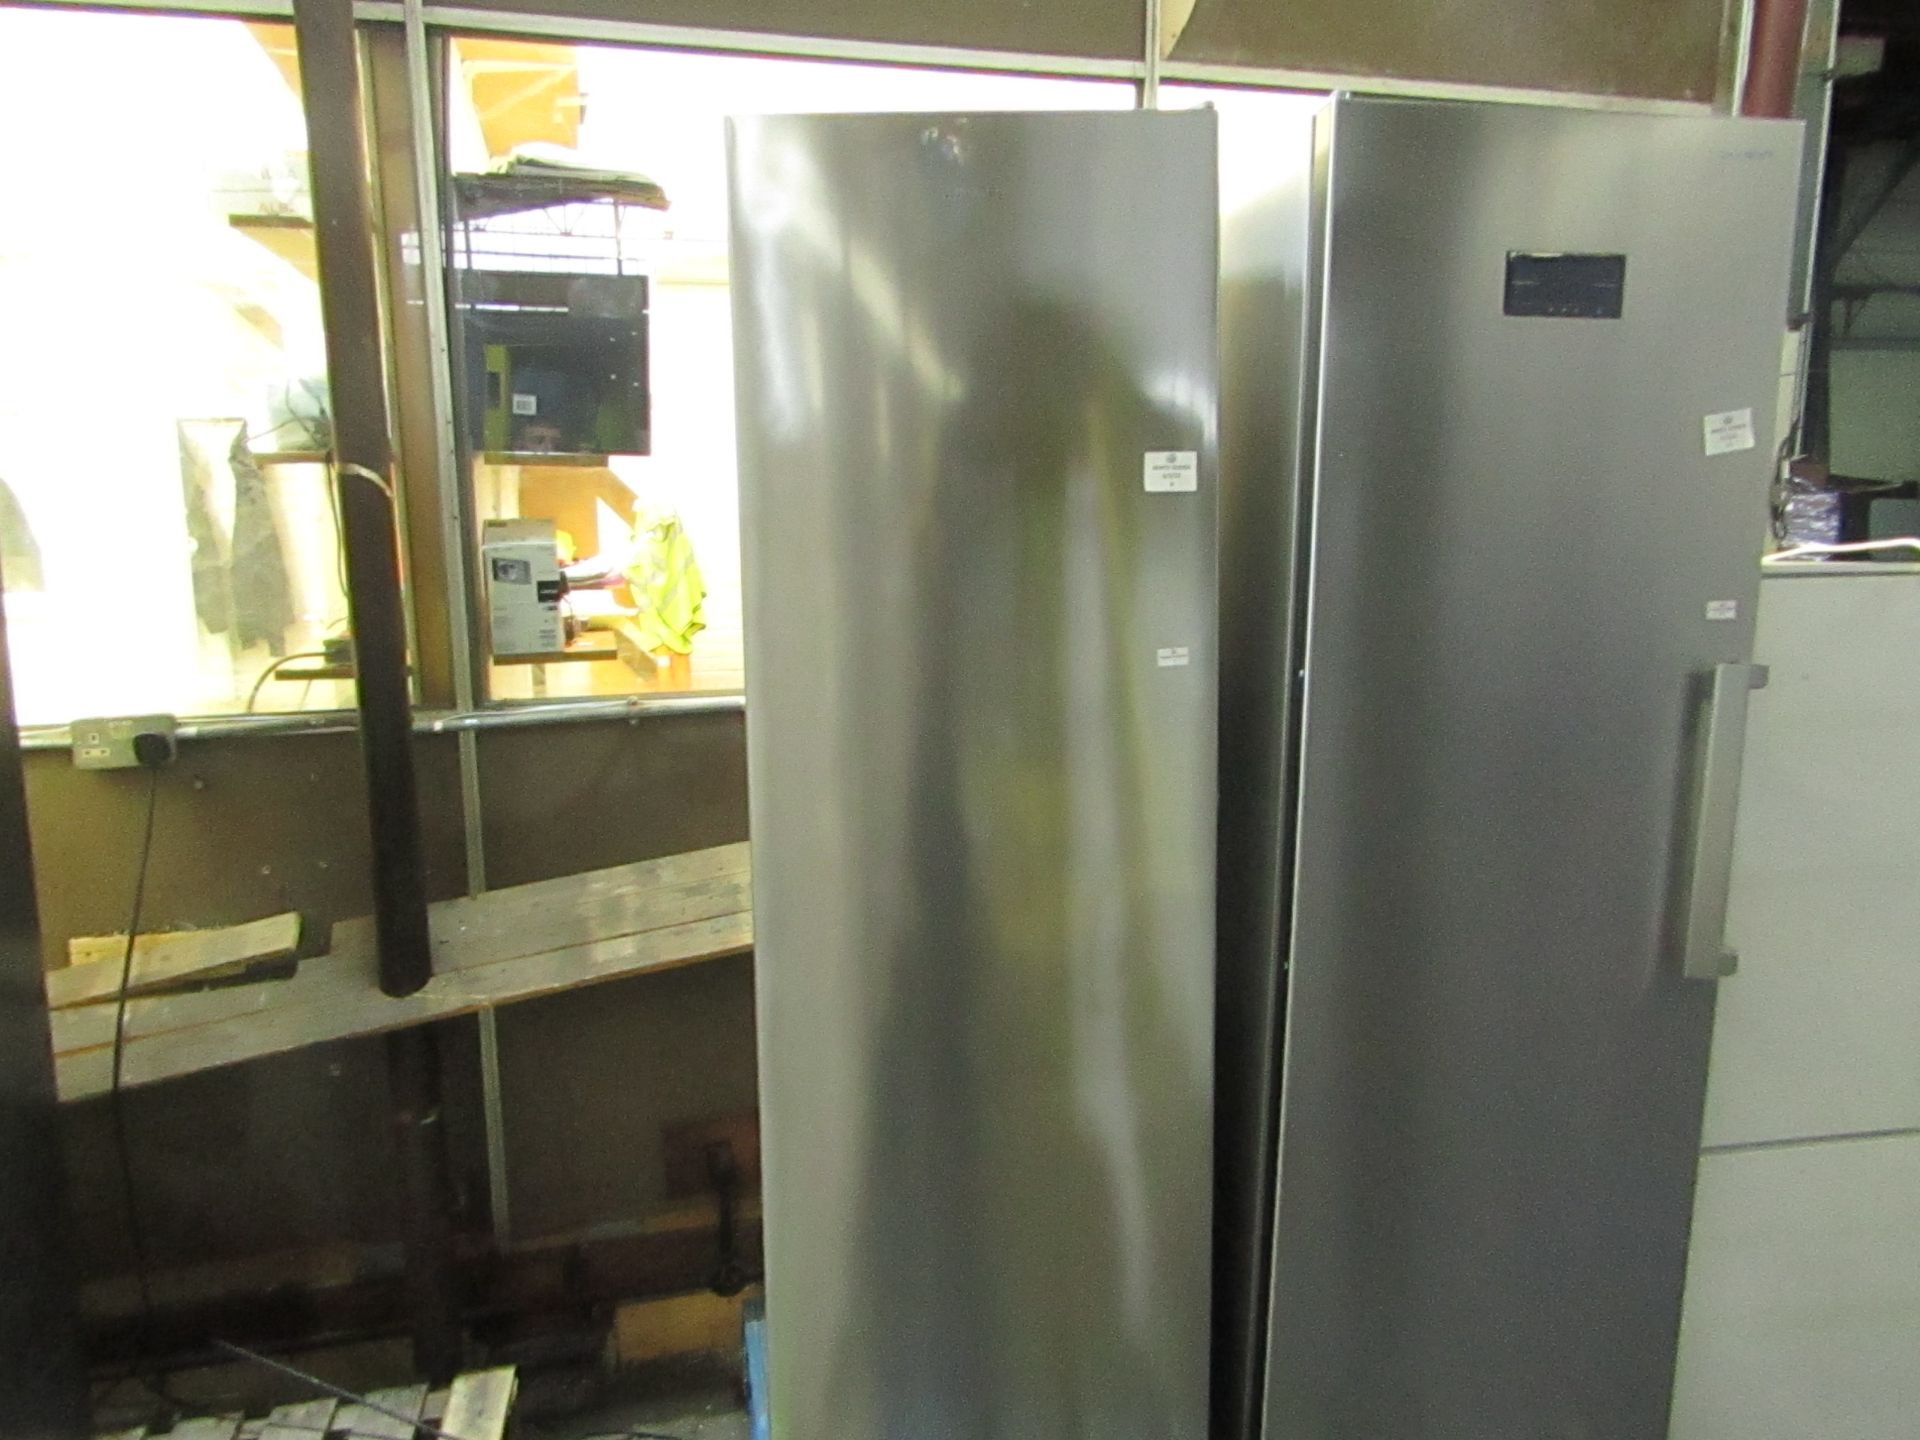 Smeg tall freestanding fridge, not getting cold and has dents on the front.